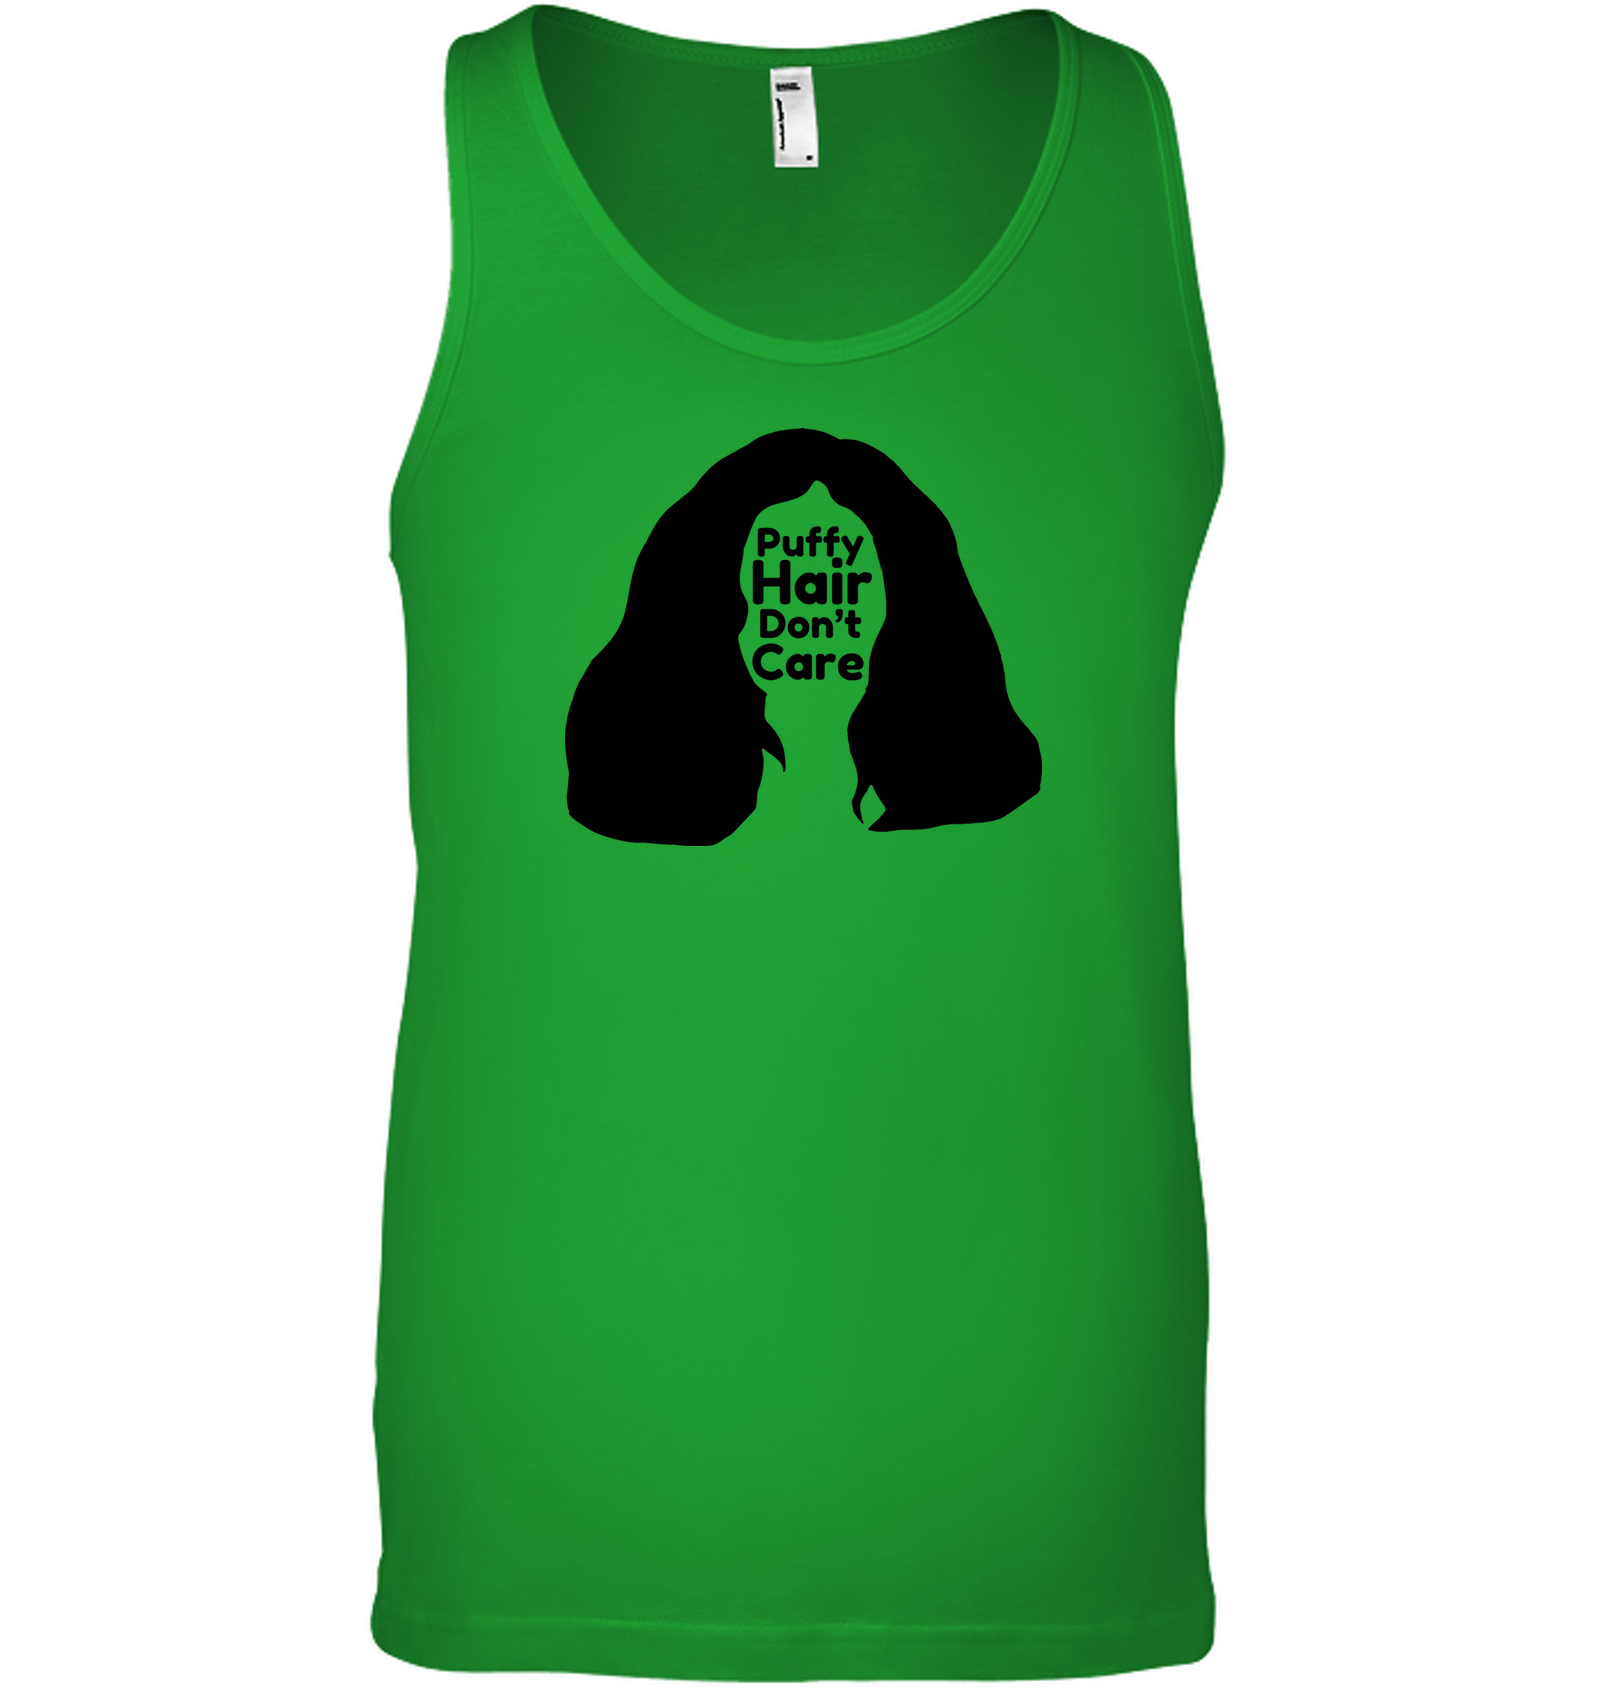 Puffy Hair Don't Care, Sophie - Bella + Canvas Unisex Jersey Tank